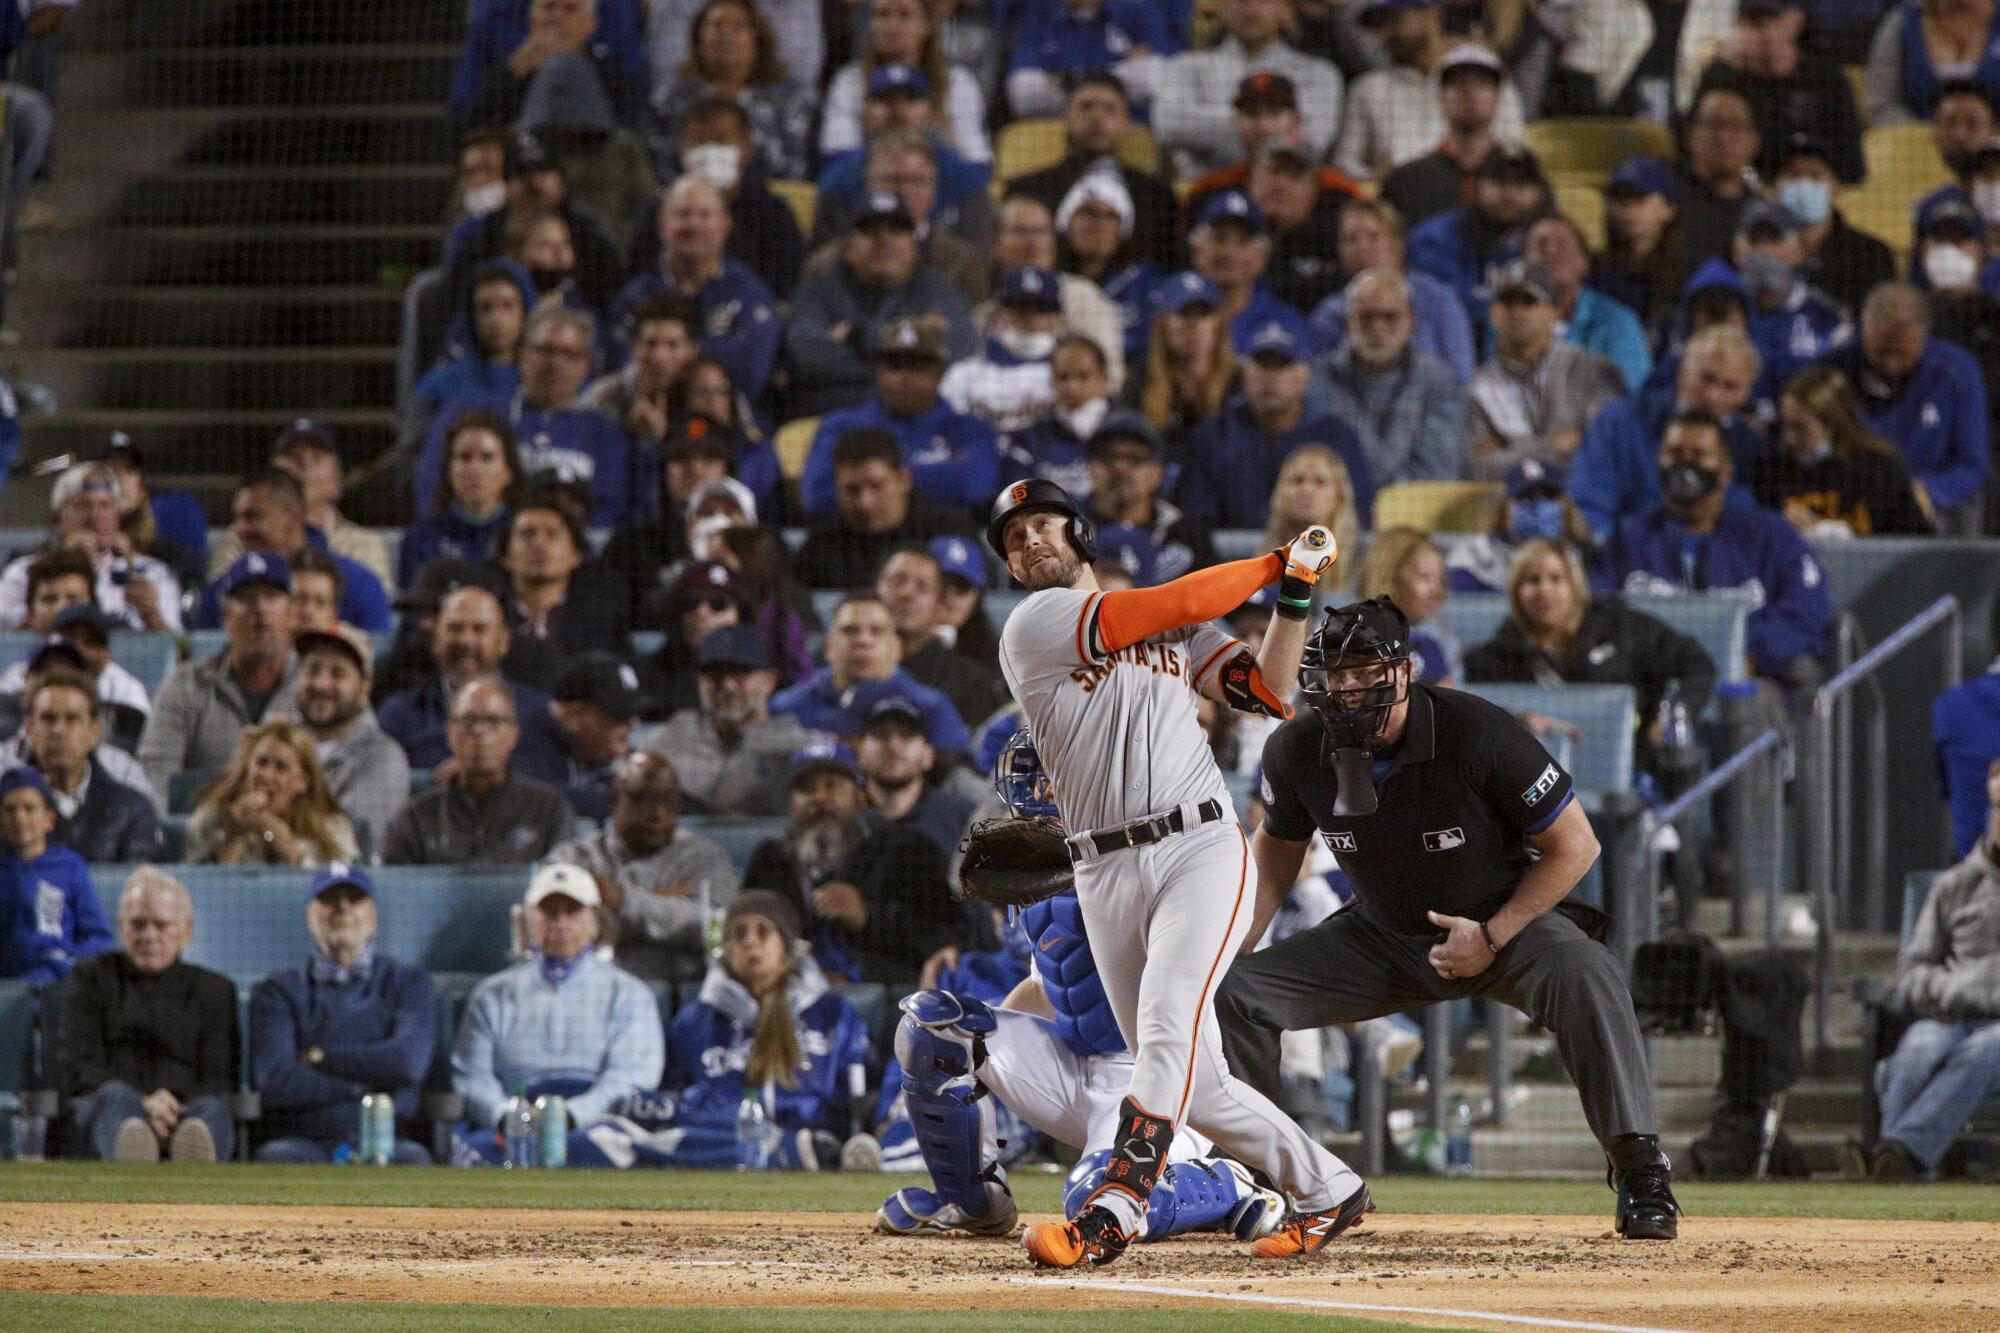 Giants' Evan Longoria hits a home run in the 5th inning.